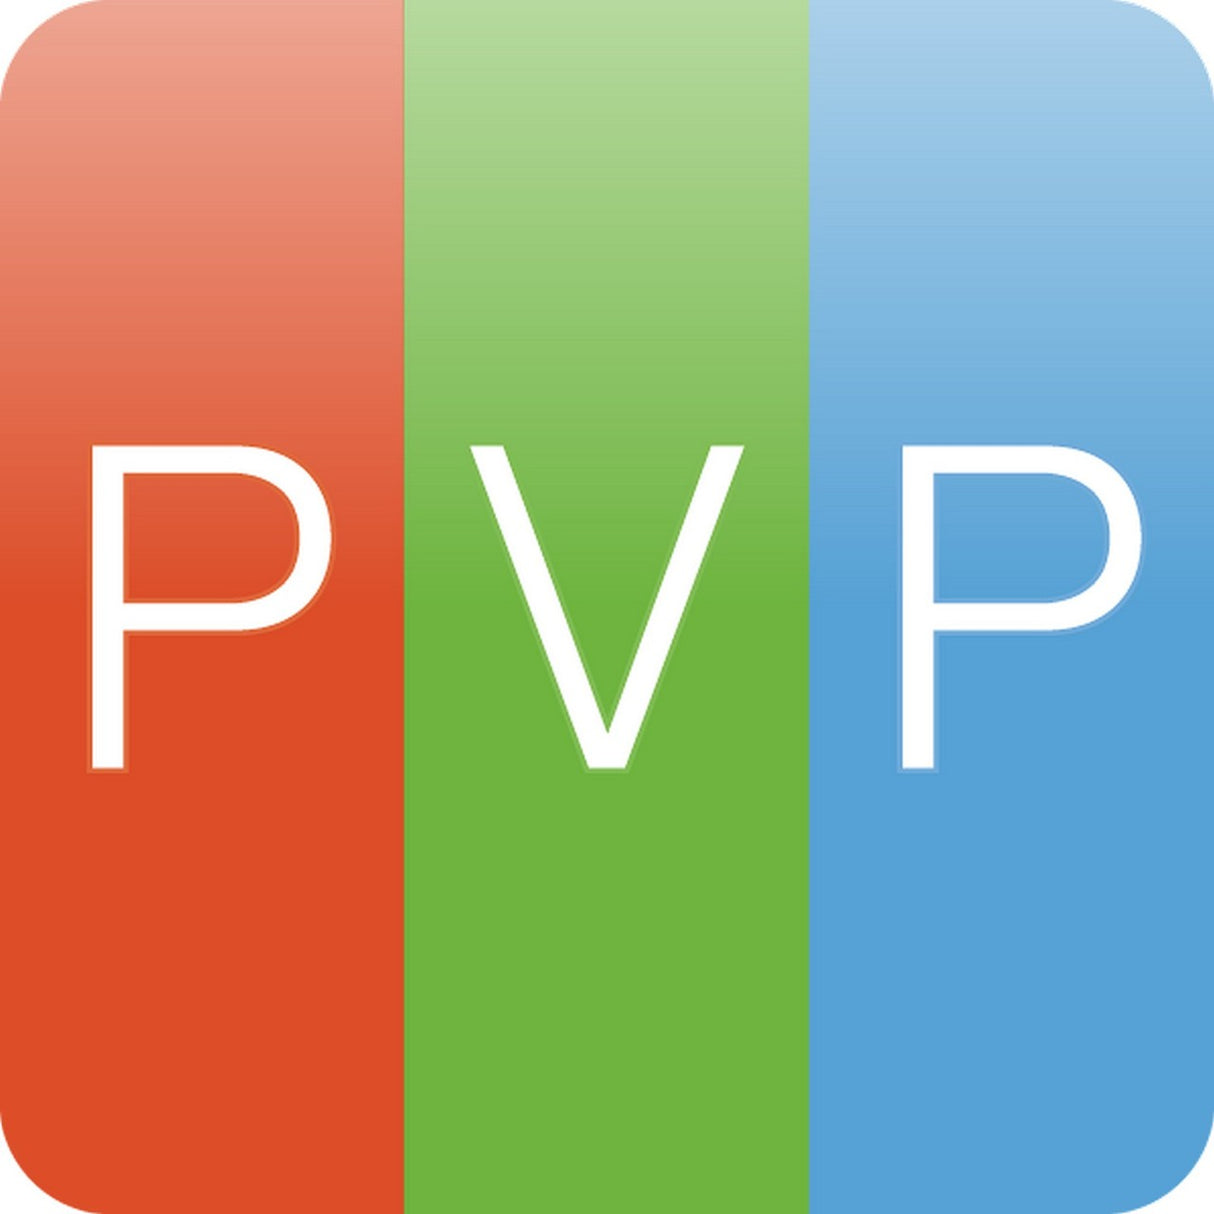 Renewed Vision ProVideoPlayer 3 | PVP 3 Professional Video Player for Mac, Download Only